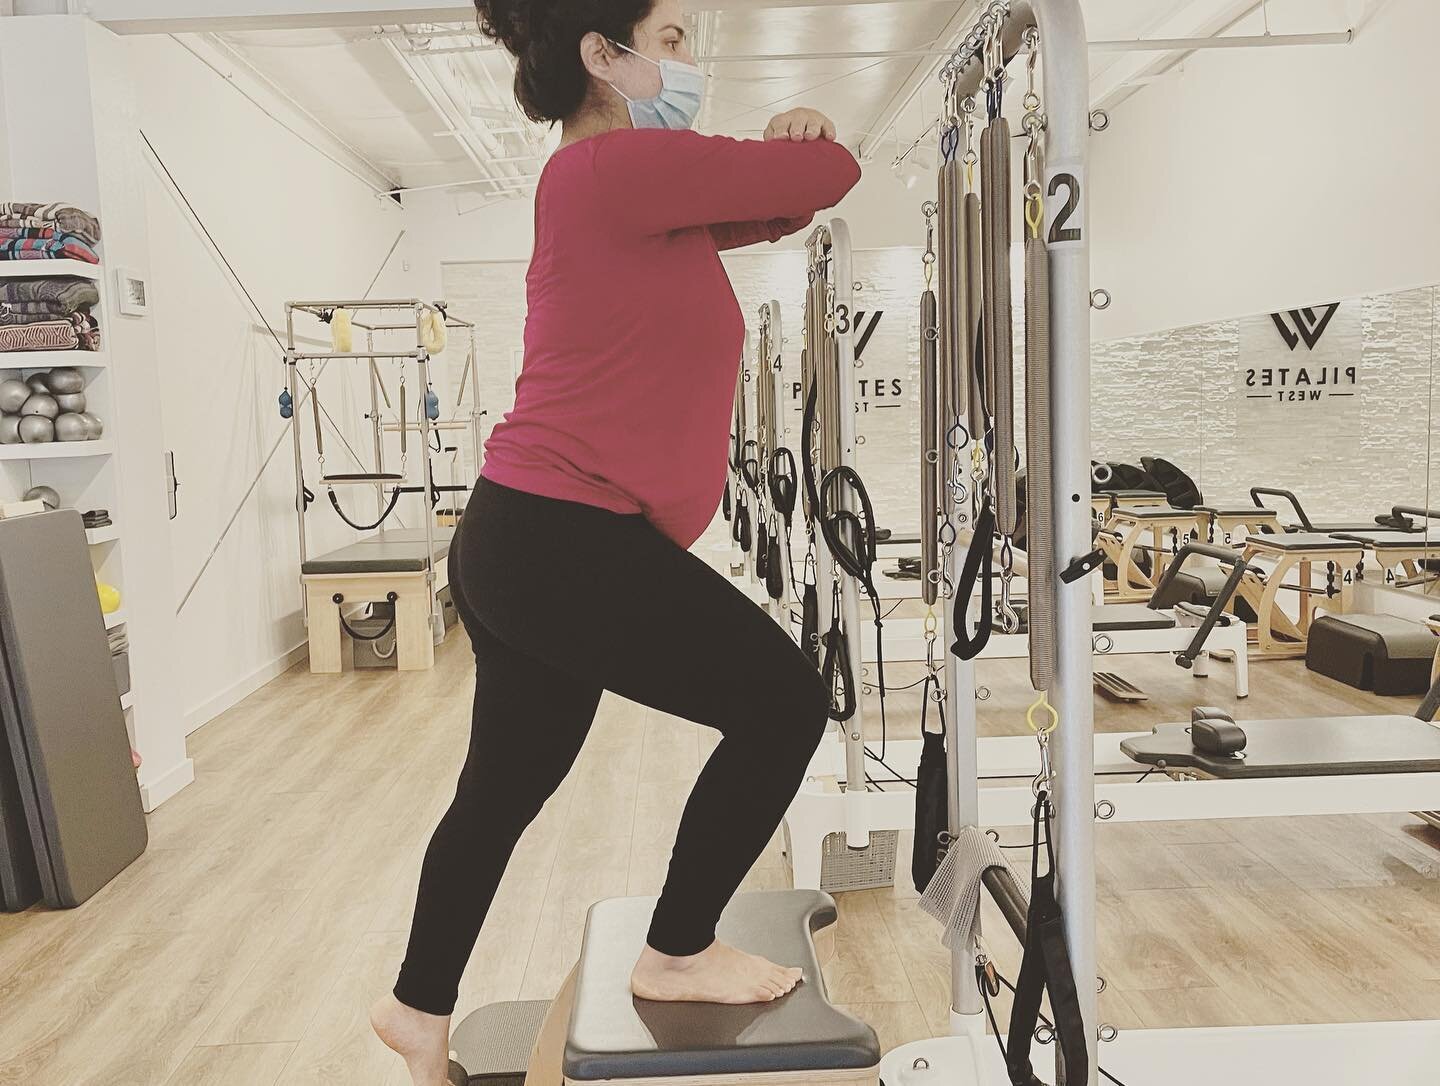 Zoya&rsquo;s mom did Pilates throughout her pregnancy. Check out her Pilates West attire and her natural Pilates positions/exercises 😉
(frog 🐸 &amp; 
swan 🦢)

#pilateswestus
#pilateslove
#controlyourself
#lovedtothecore
#prenatalfitness #prenatalp